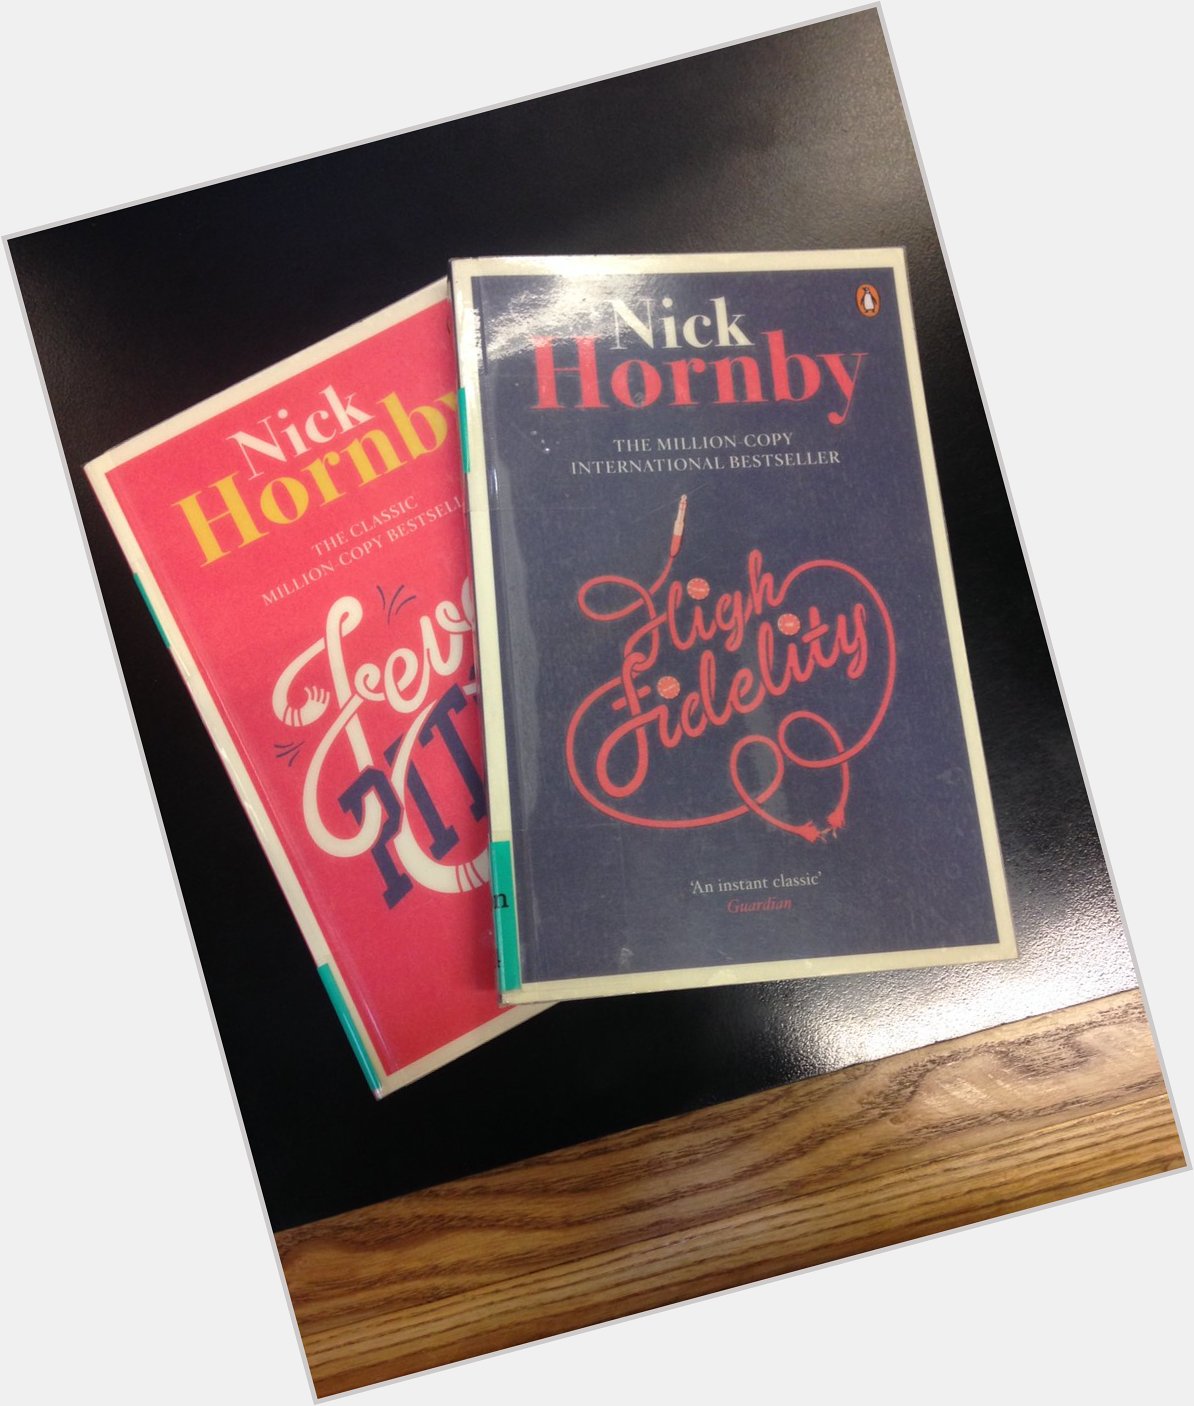 Happy birthday to Nick Hornby! Check out some of his work in our General Interest section. 